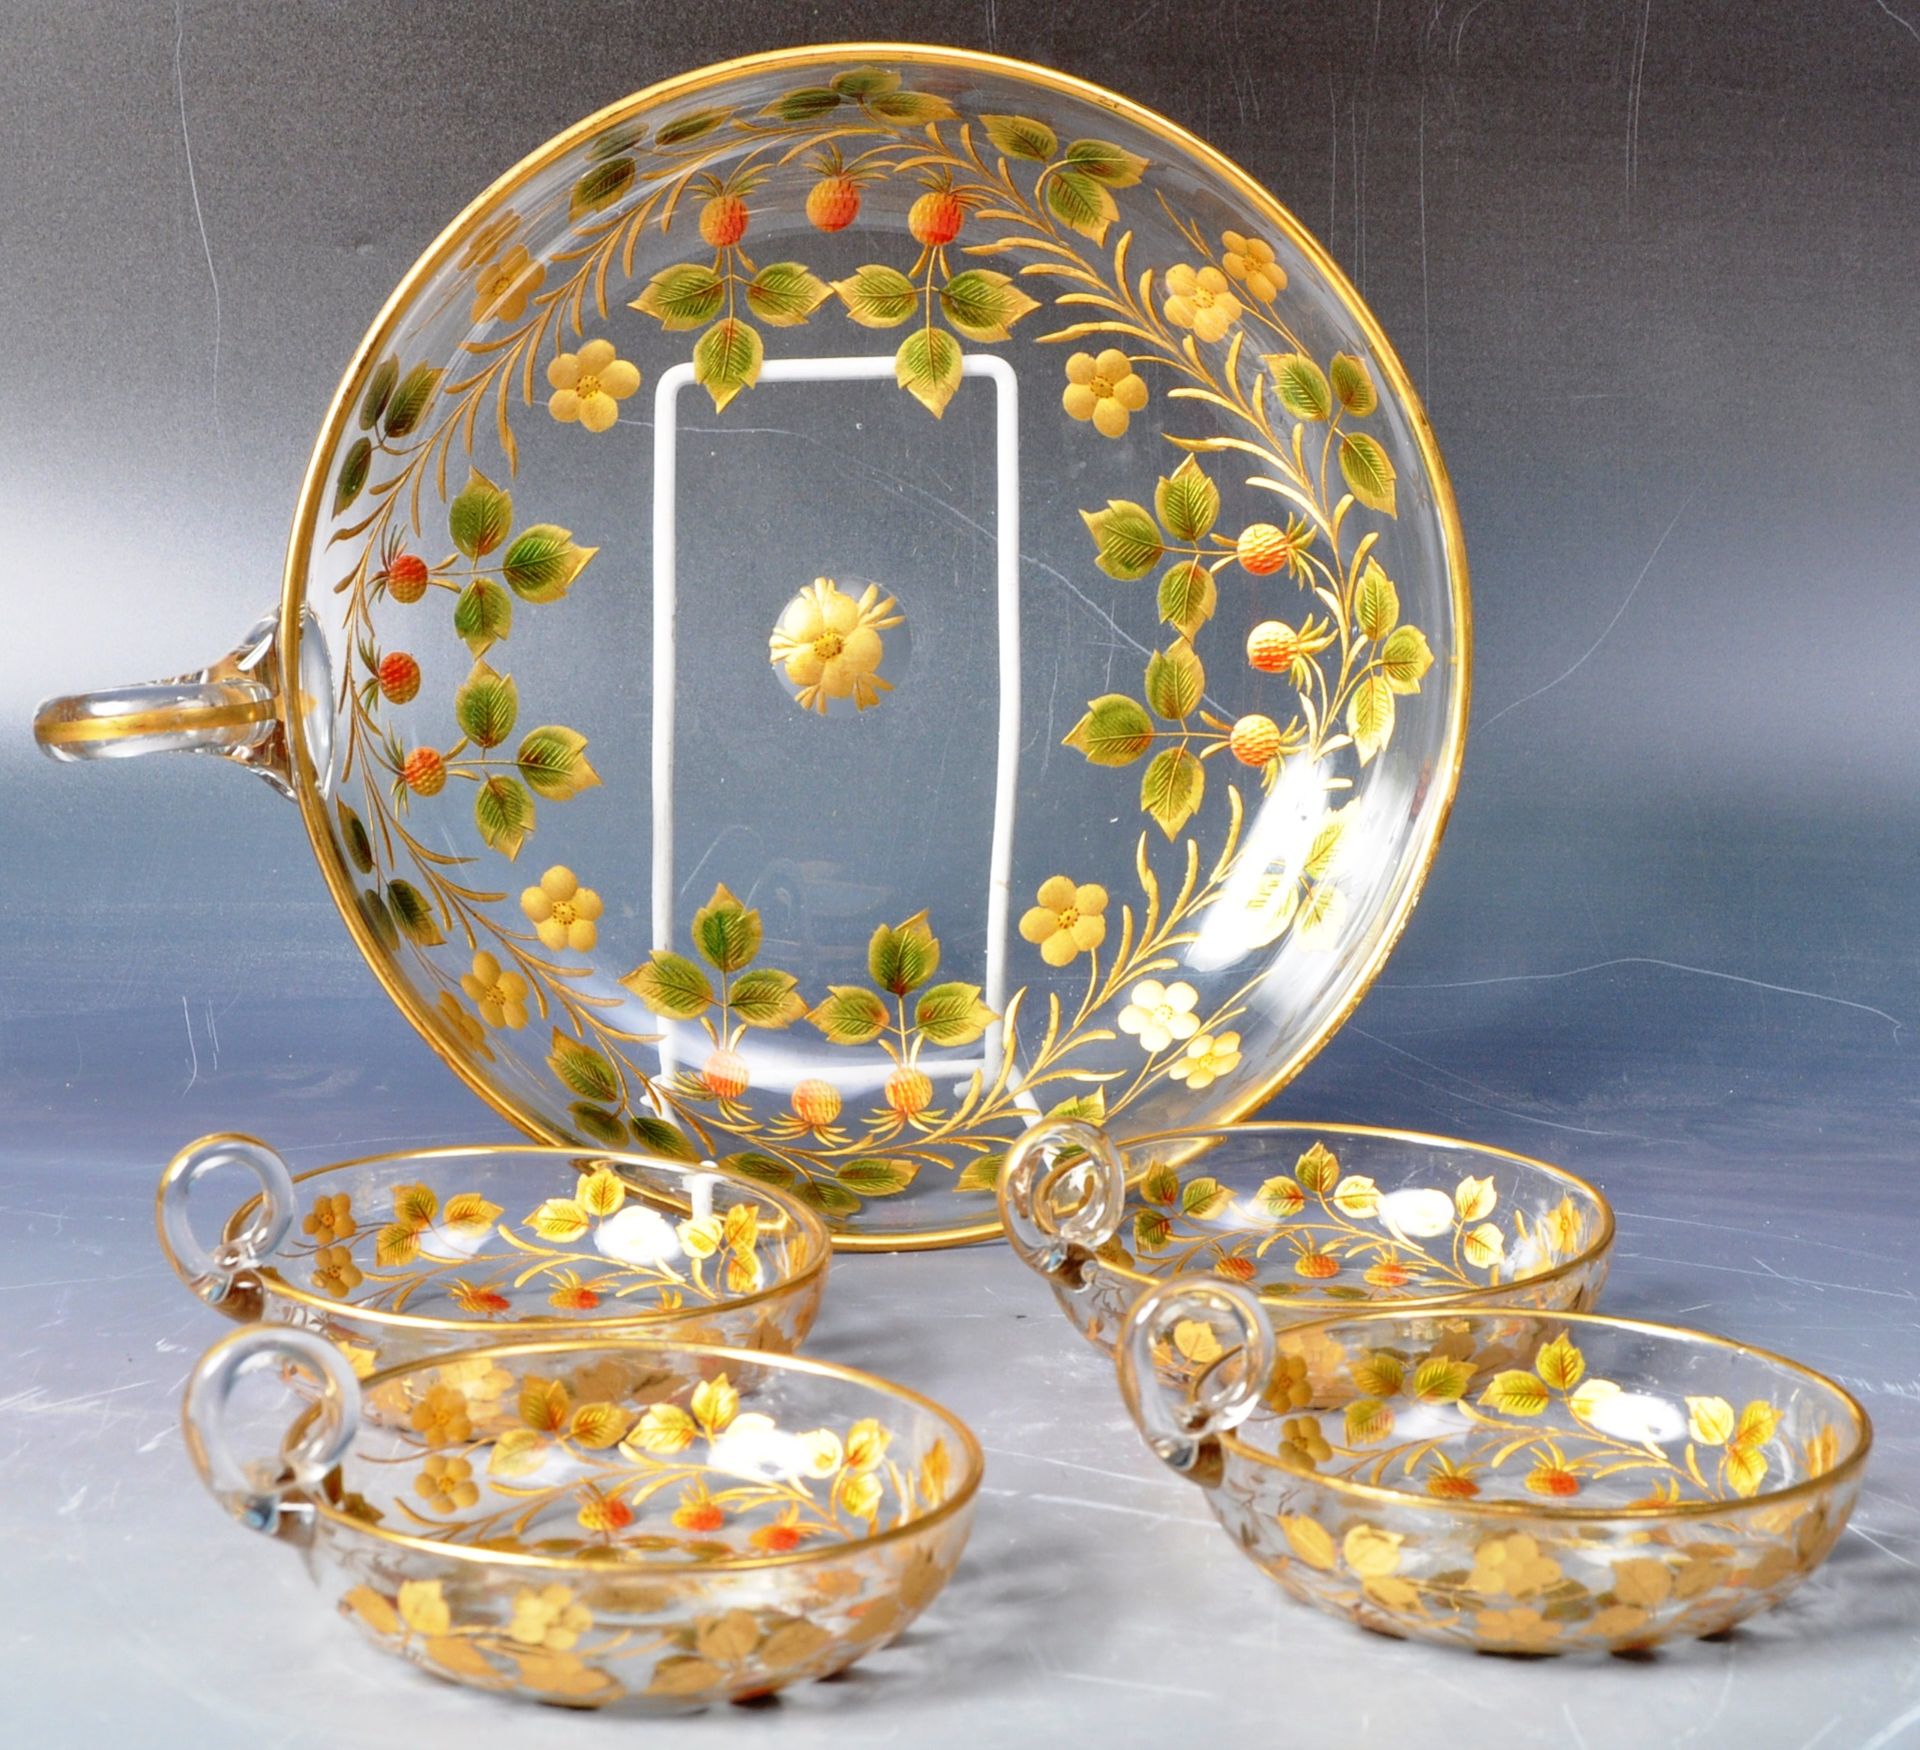 EARLY 20TH CENTURY FRENCH GILDED STRAWBERRY SET